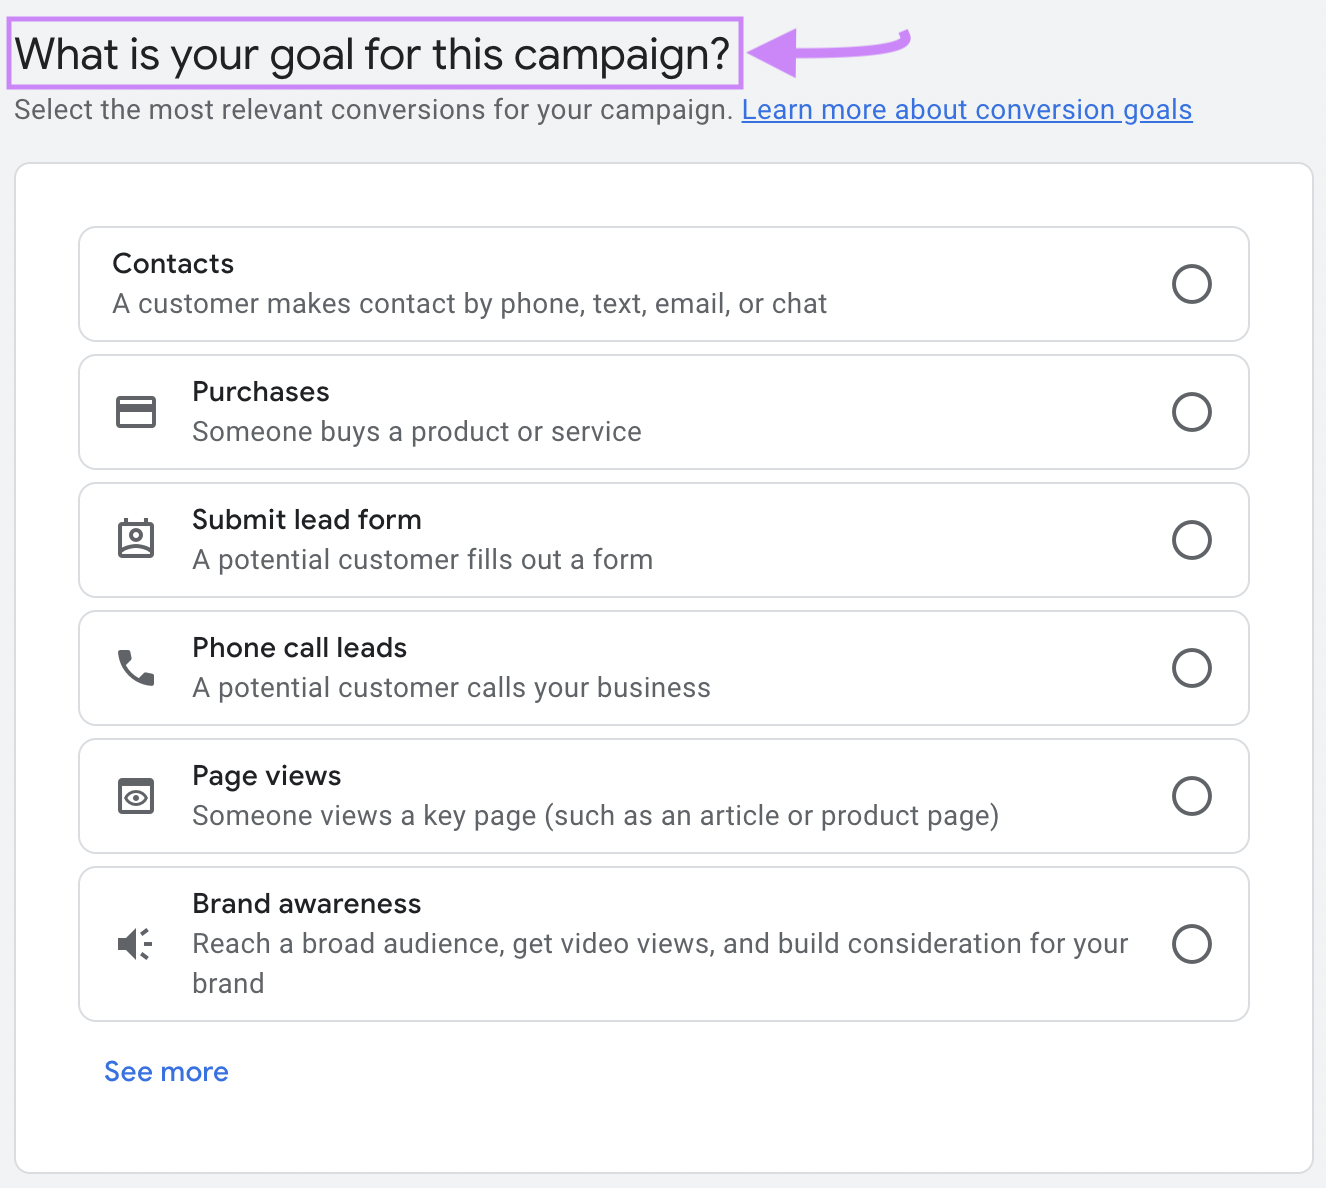 "What is your goal for this campaign?" page in Google Ads